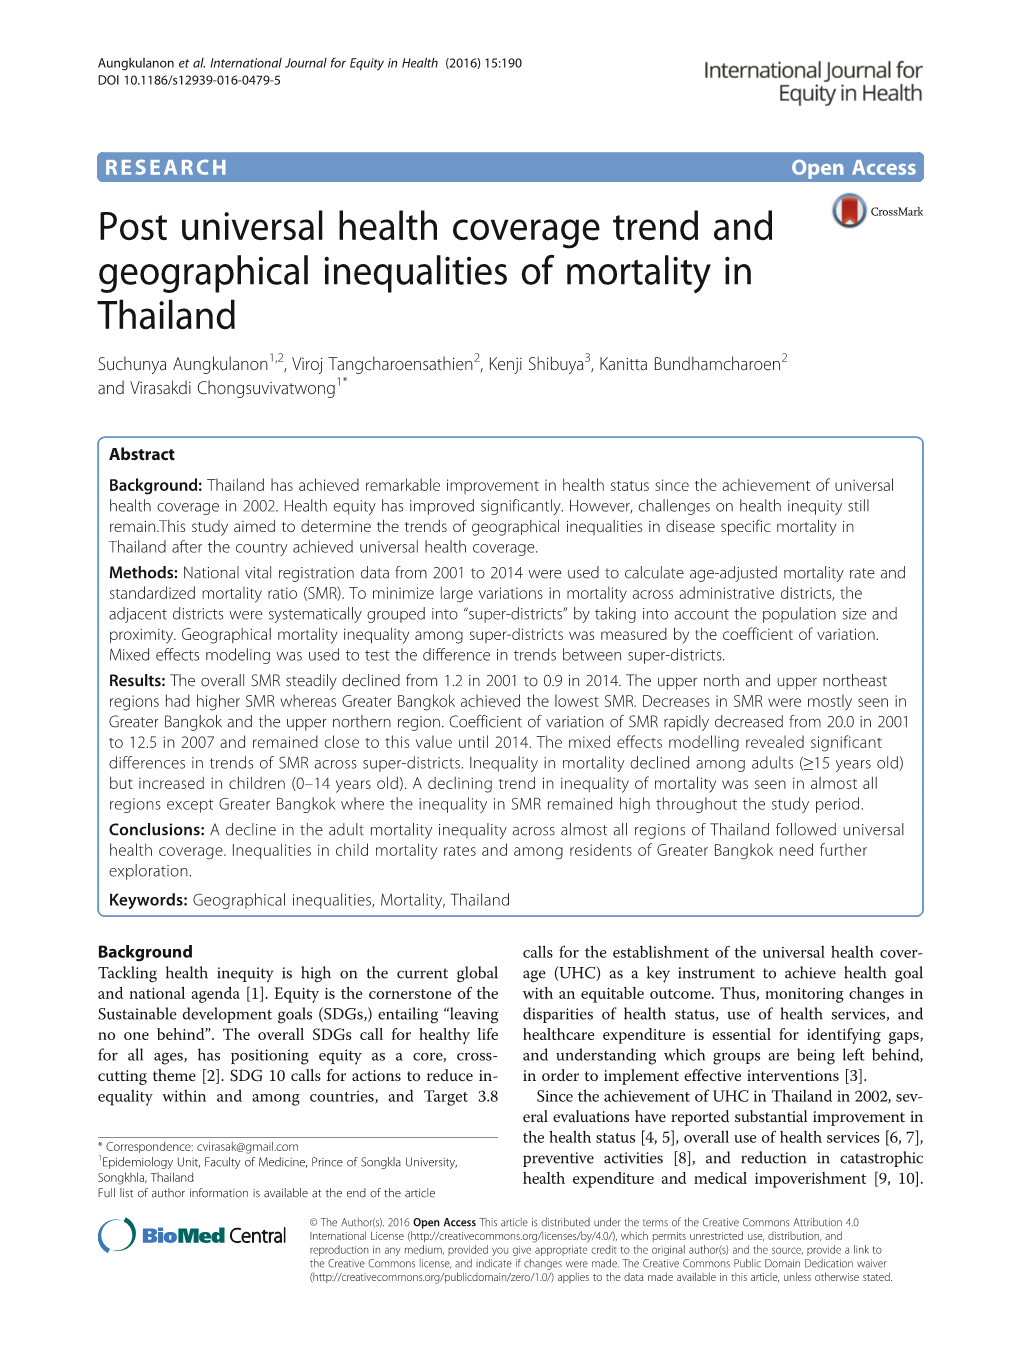 Post Universal Health Coverage Trend and Geographical Inequalities of Mortality in Thailand